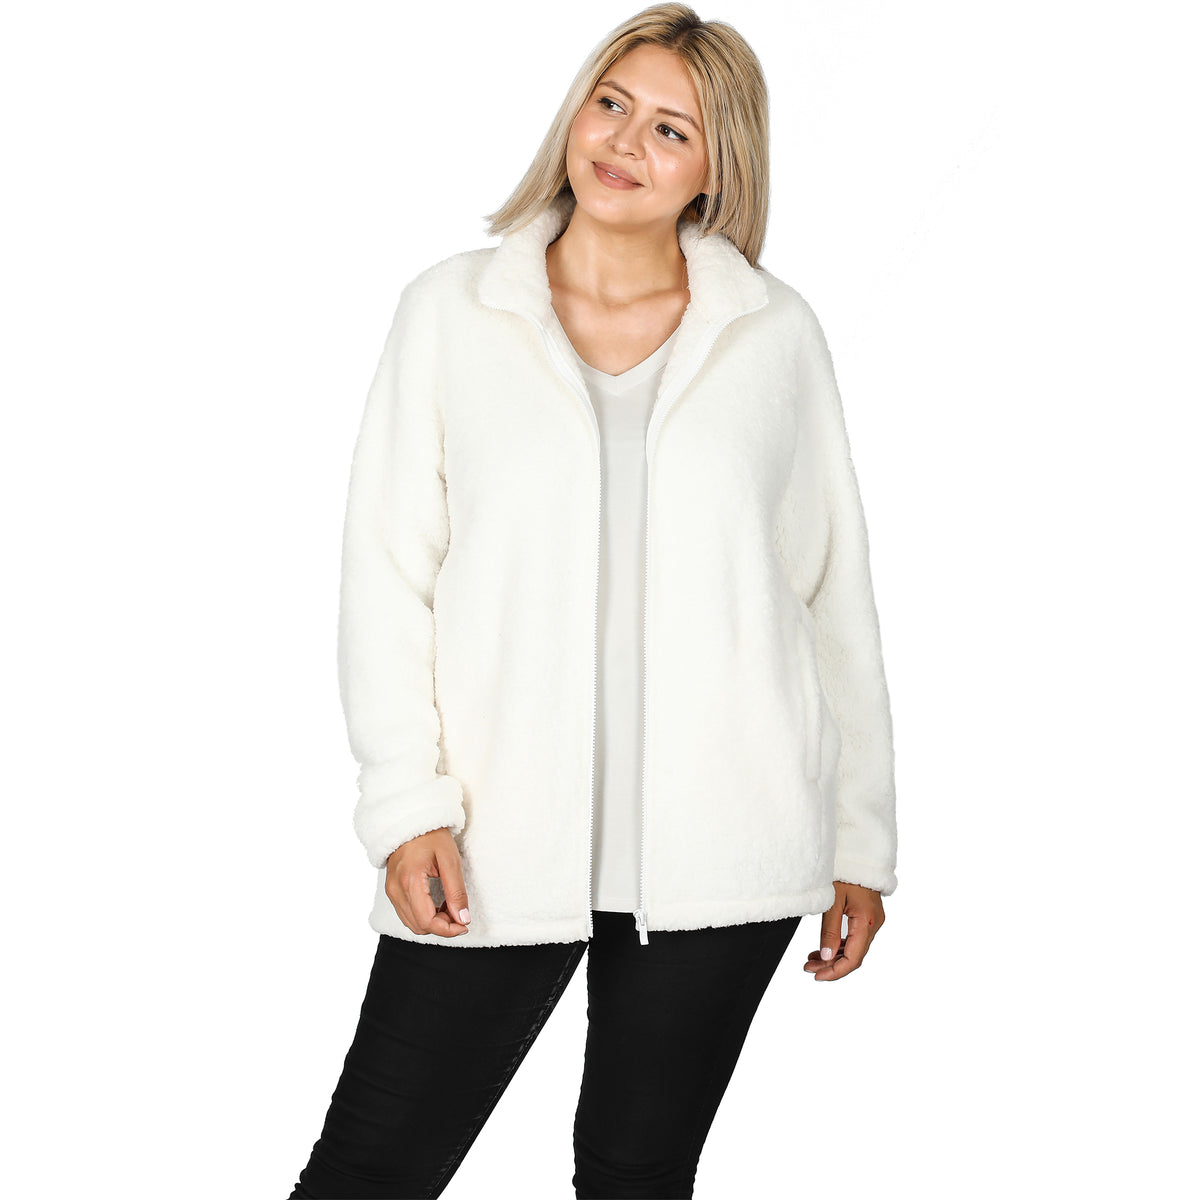 Cozette Sherpa Jacket with Pockets